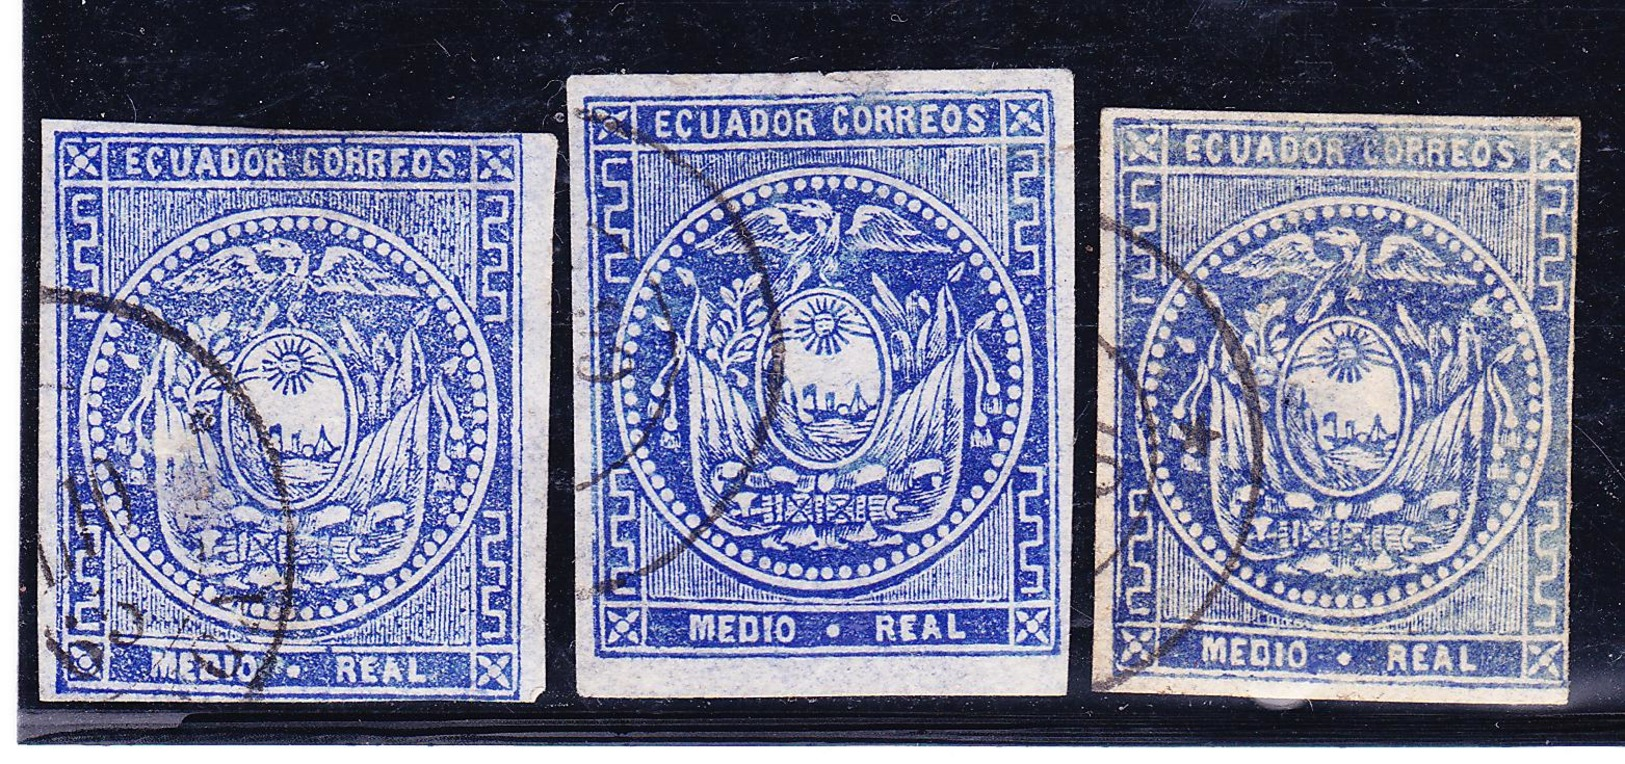 ECUADOR 1865-1867 COAT OF ARMS HALF REAL BLUE FIRST EMISSION CANCELLED OF 3 FIRST YEARS 65'-66'-67 SC# 2 - Equateur